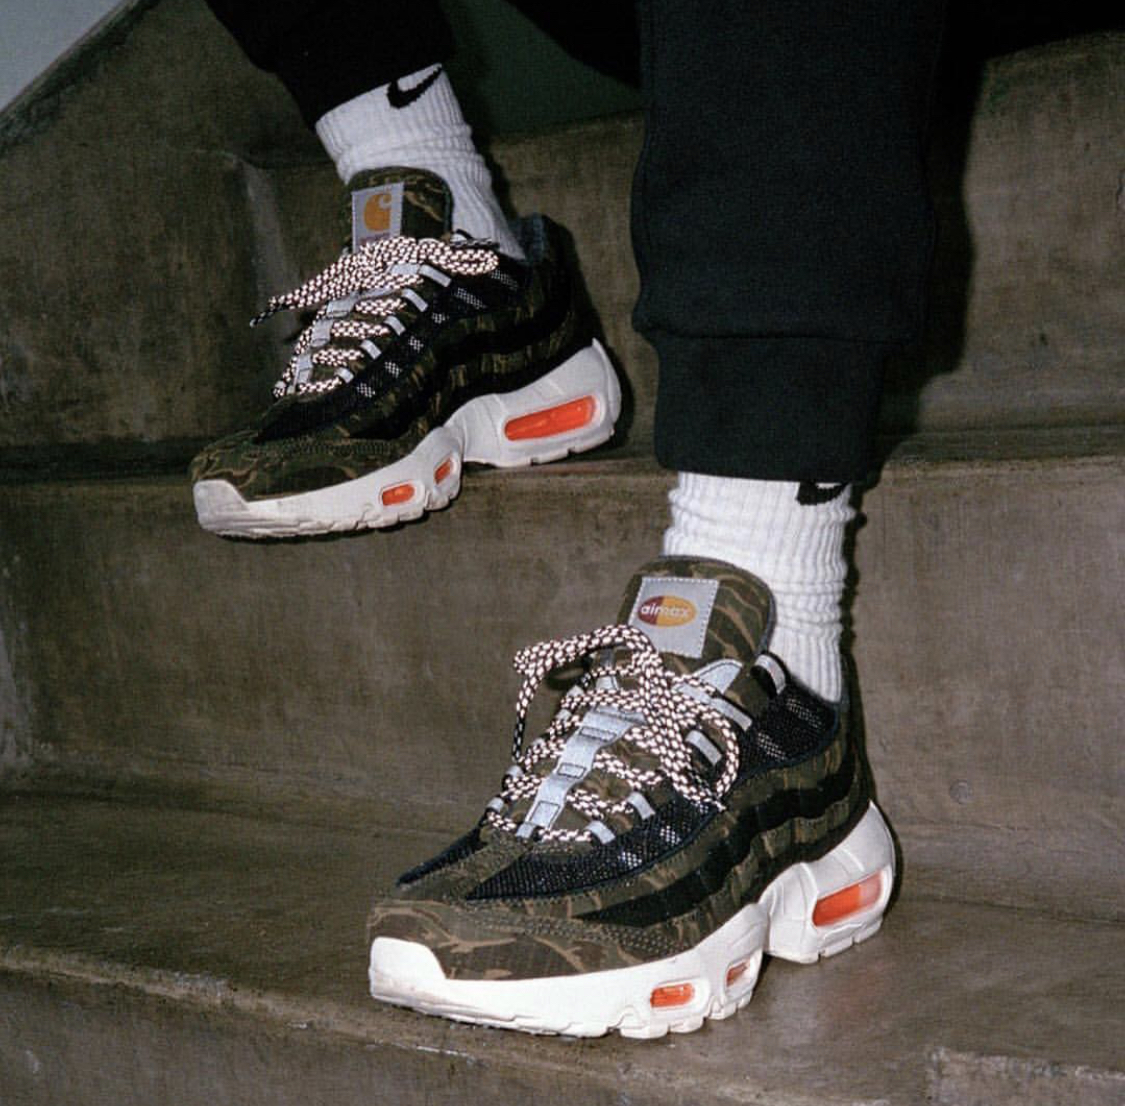 Now Available: Carhartt WIP x Nike Air Max 95 